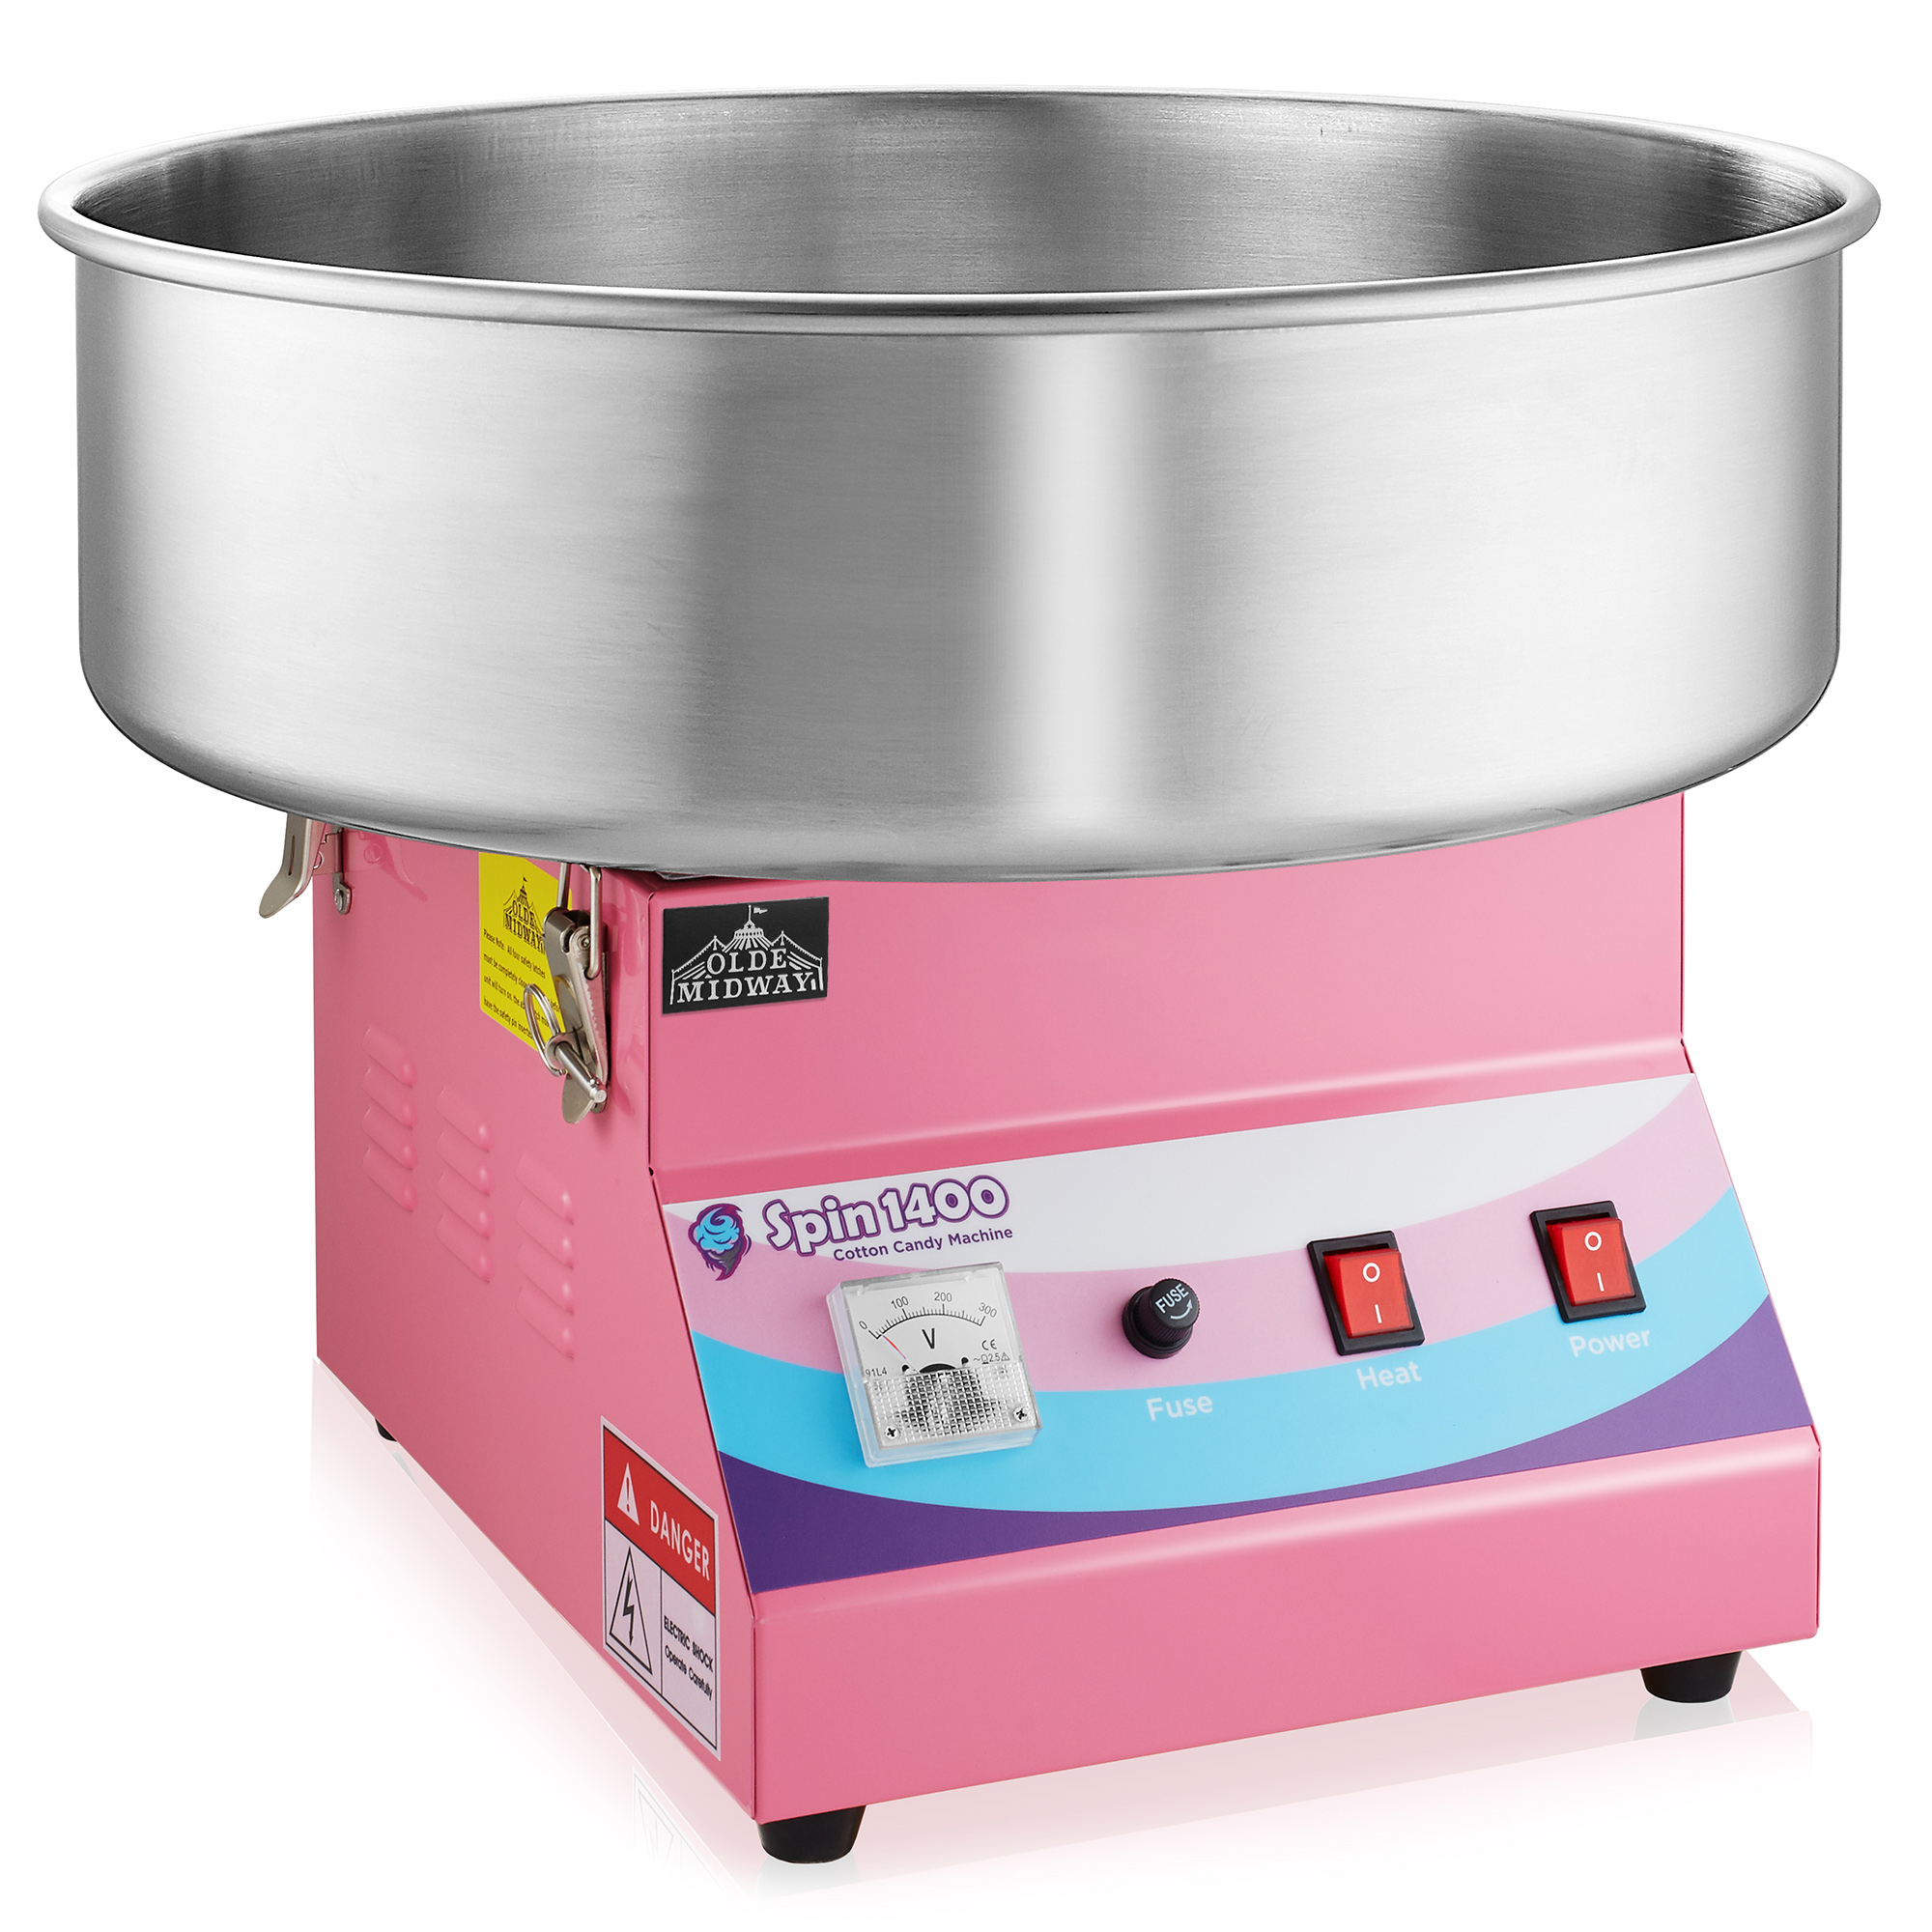 Olde Midway Cotton Candy Machine, Pink - Commercial Quality Electric Candy Floss Maker